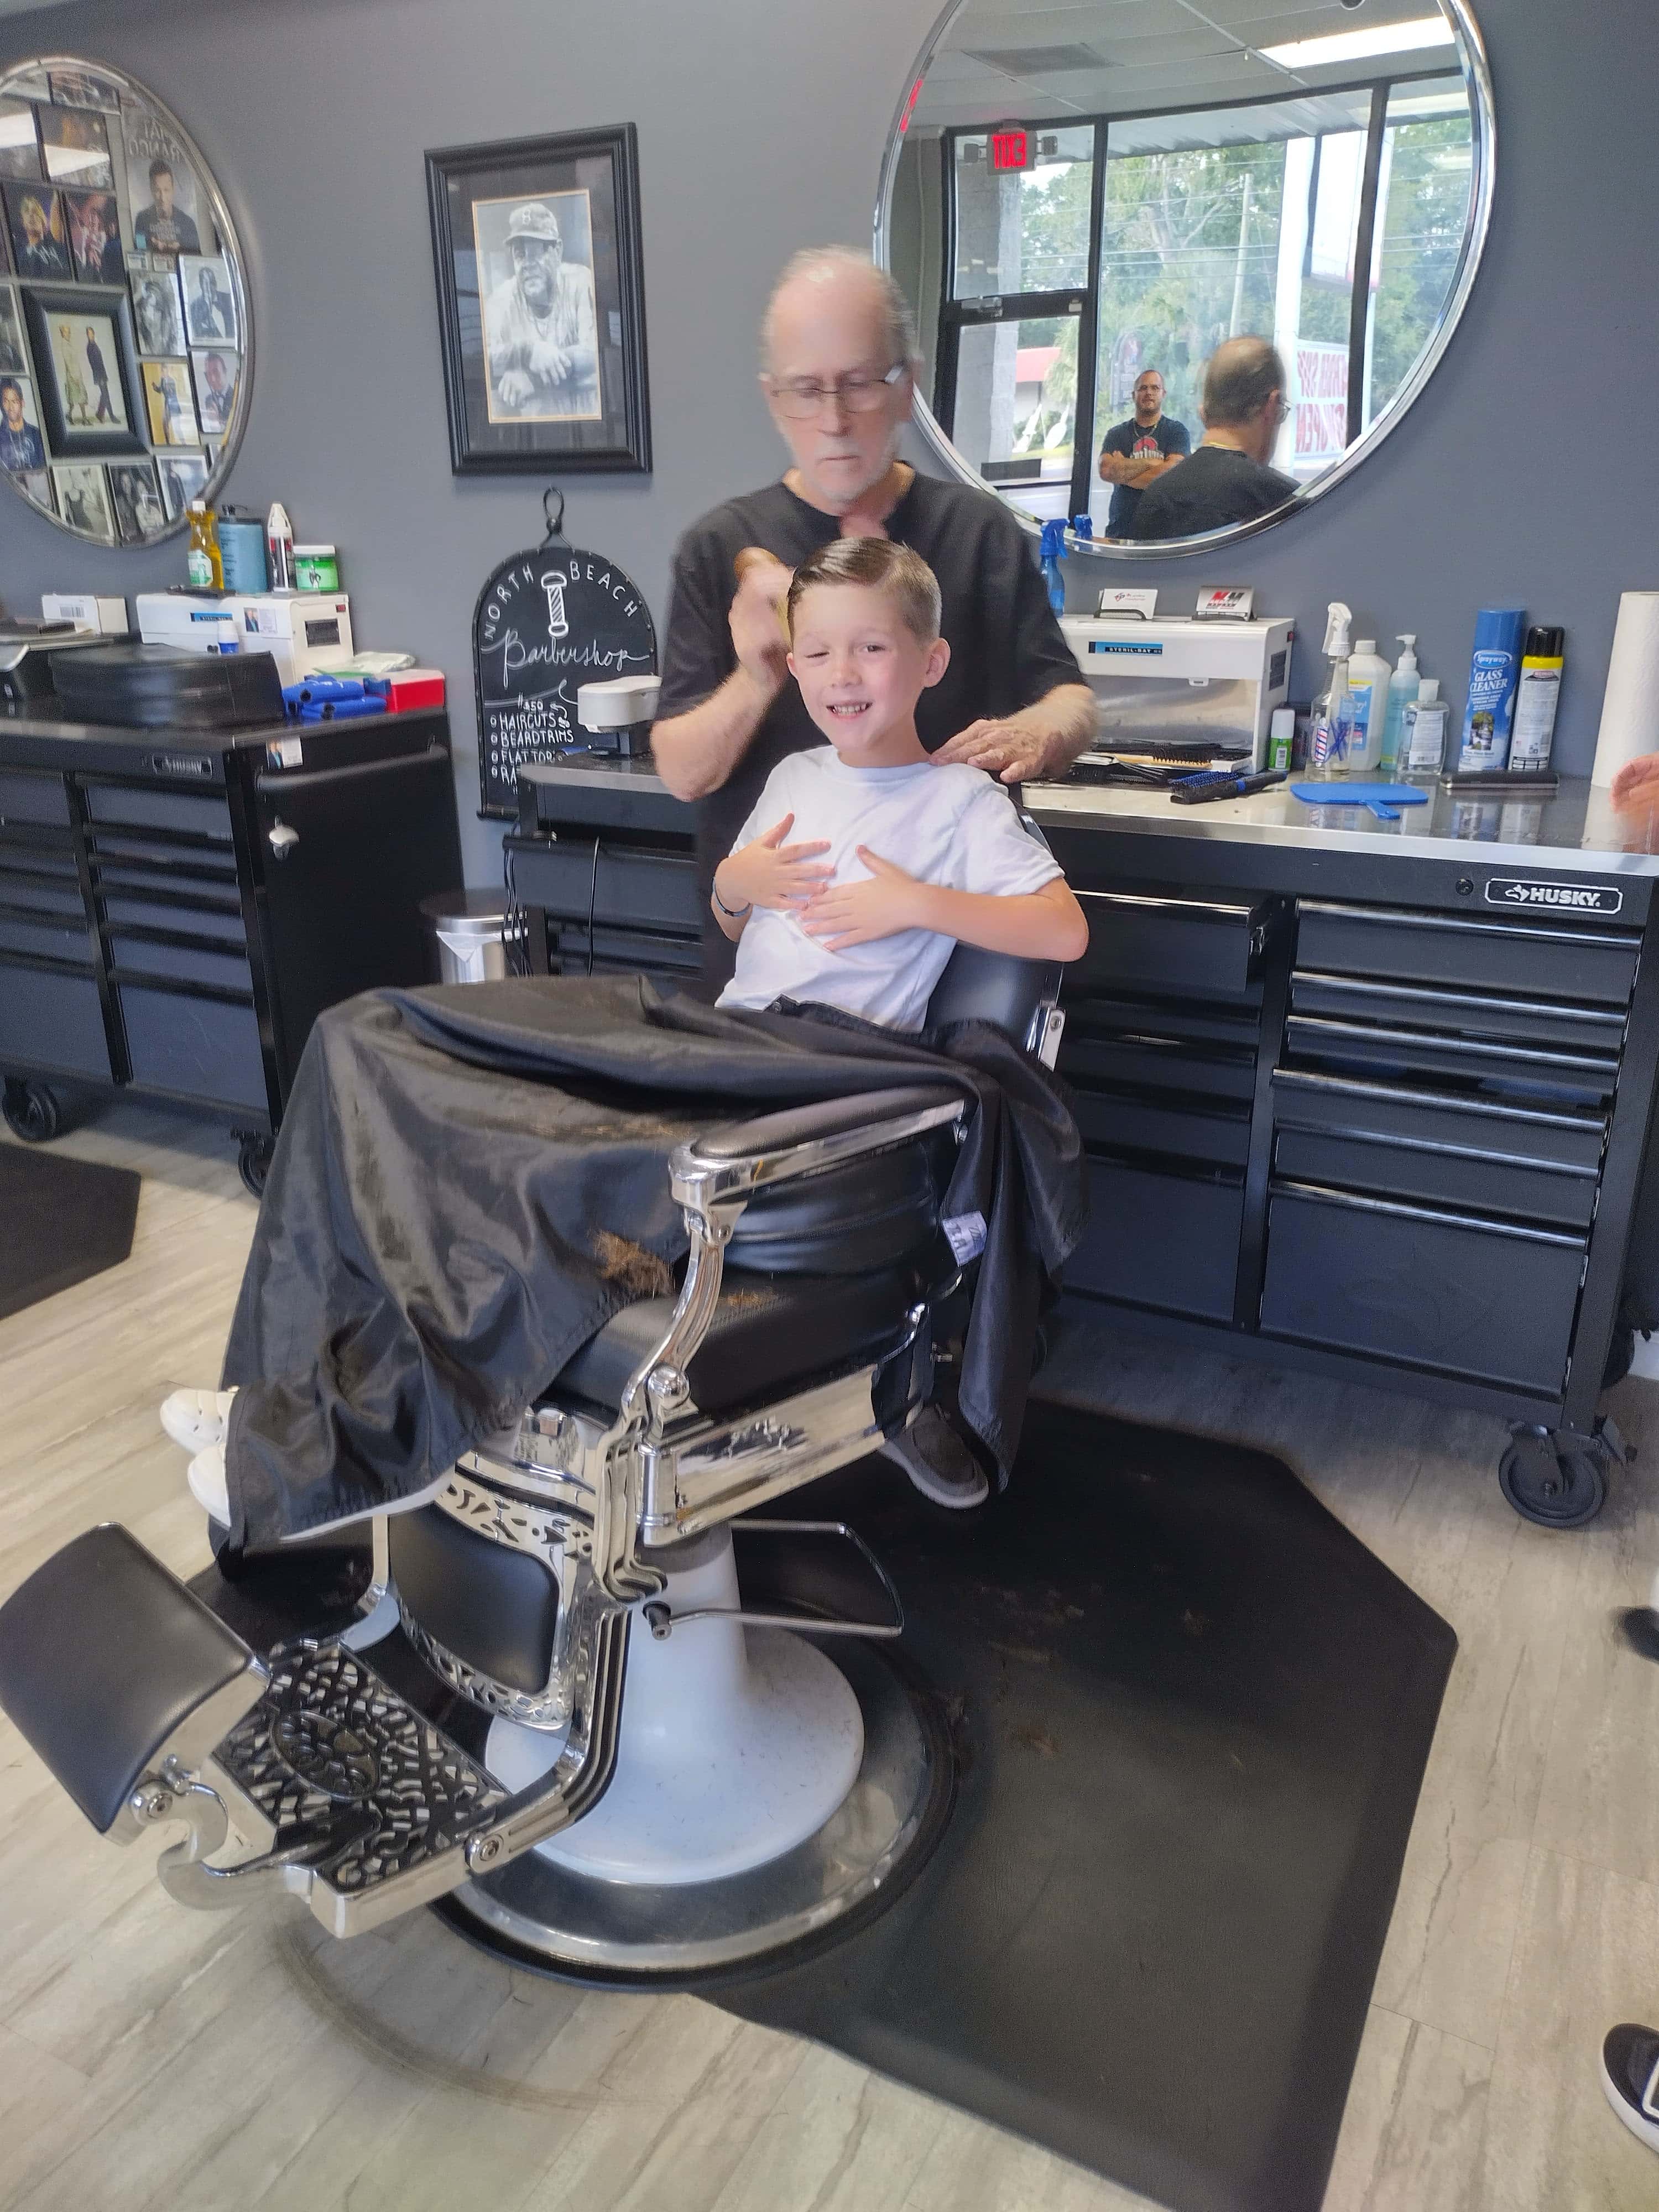 North Beach Barber Shop - North Myrtle Beach, SC, US, haircut styles for older men